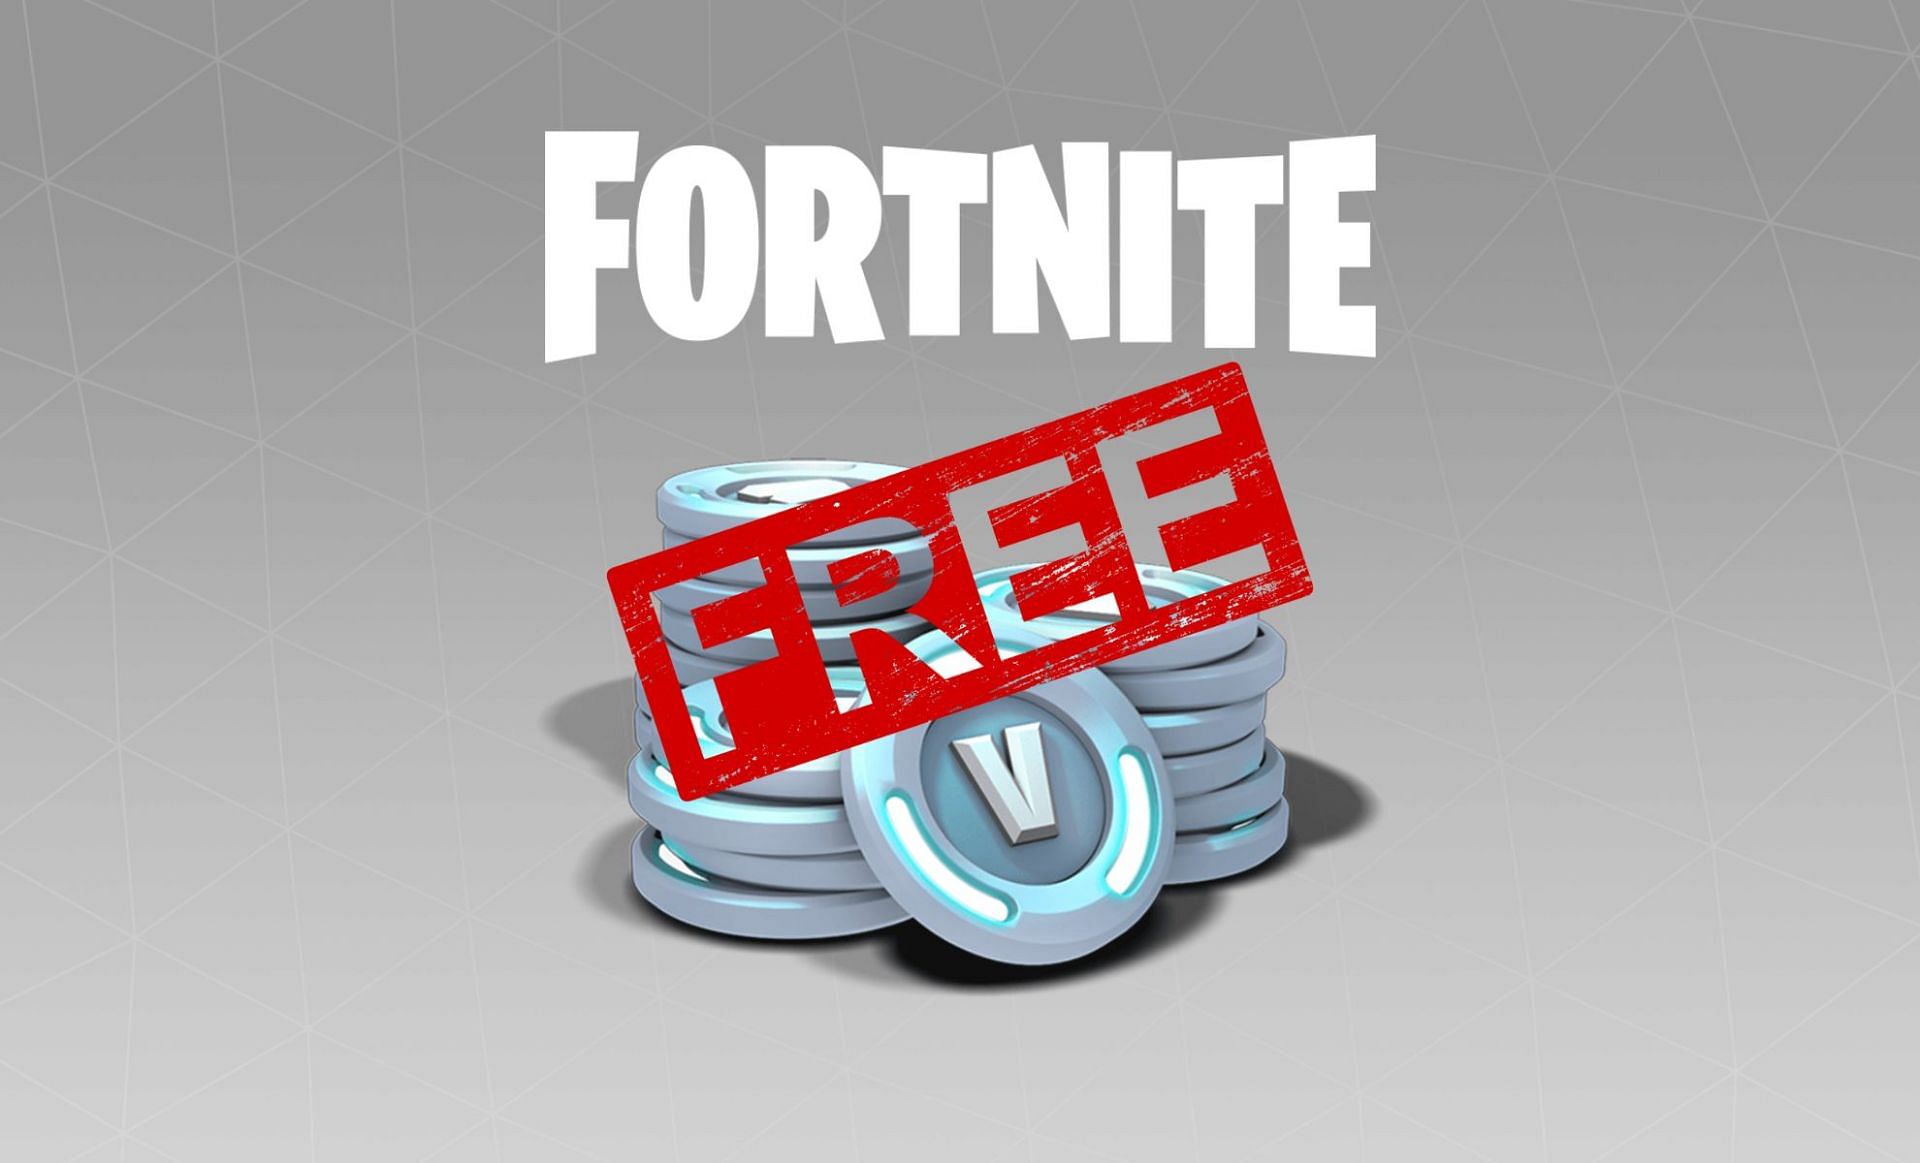 Fortnite is giving players 500 free V-Bucks for free, check your eligibility